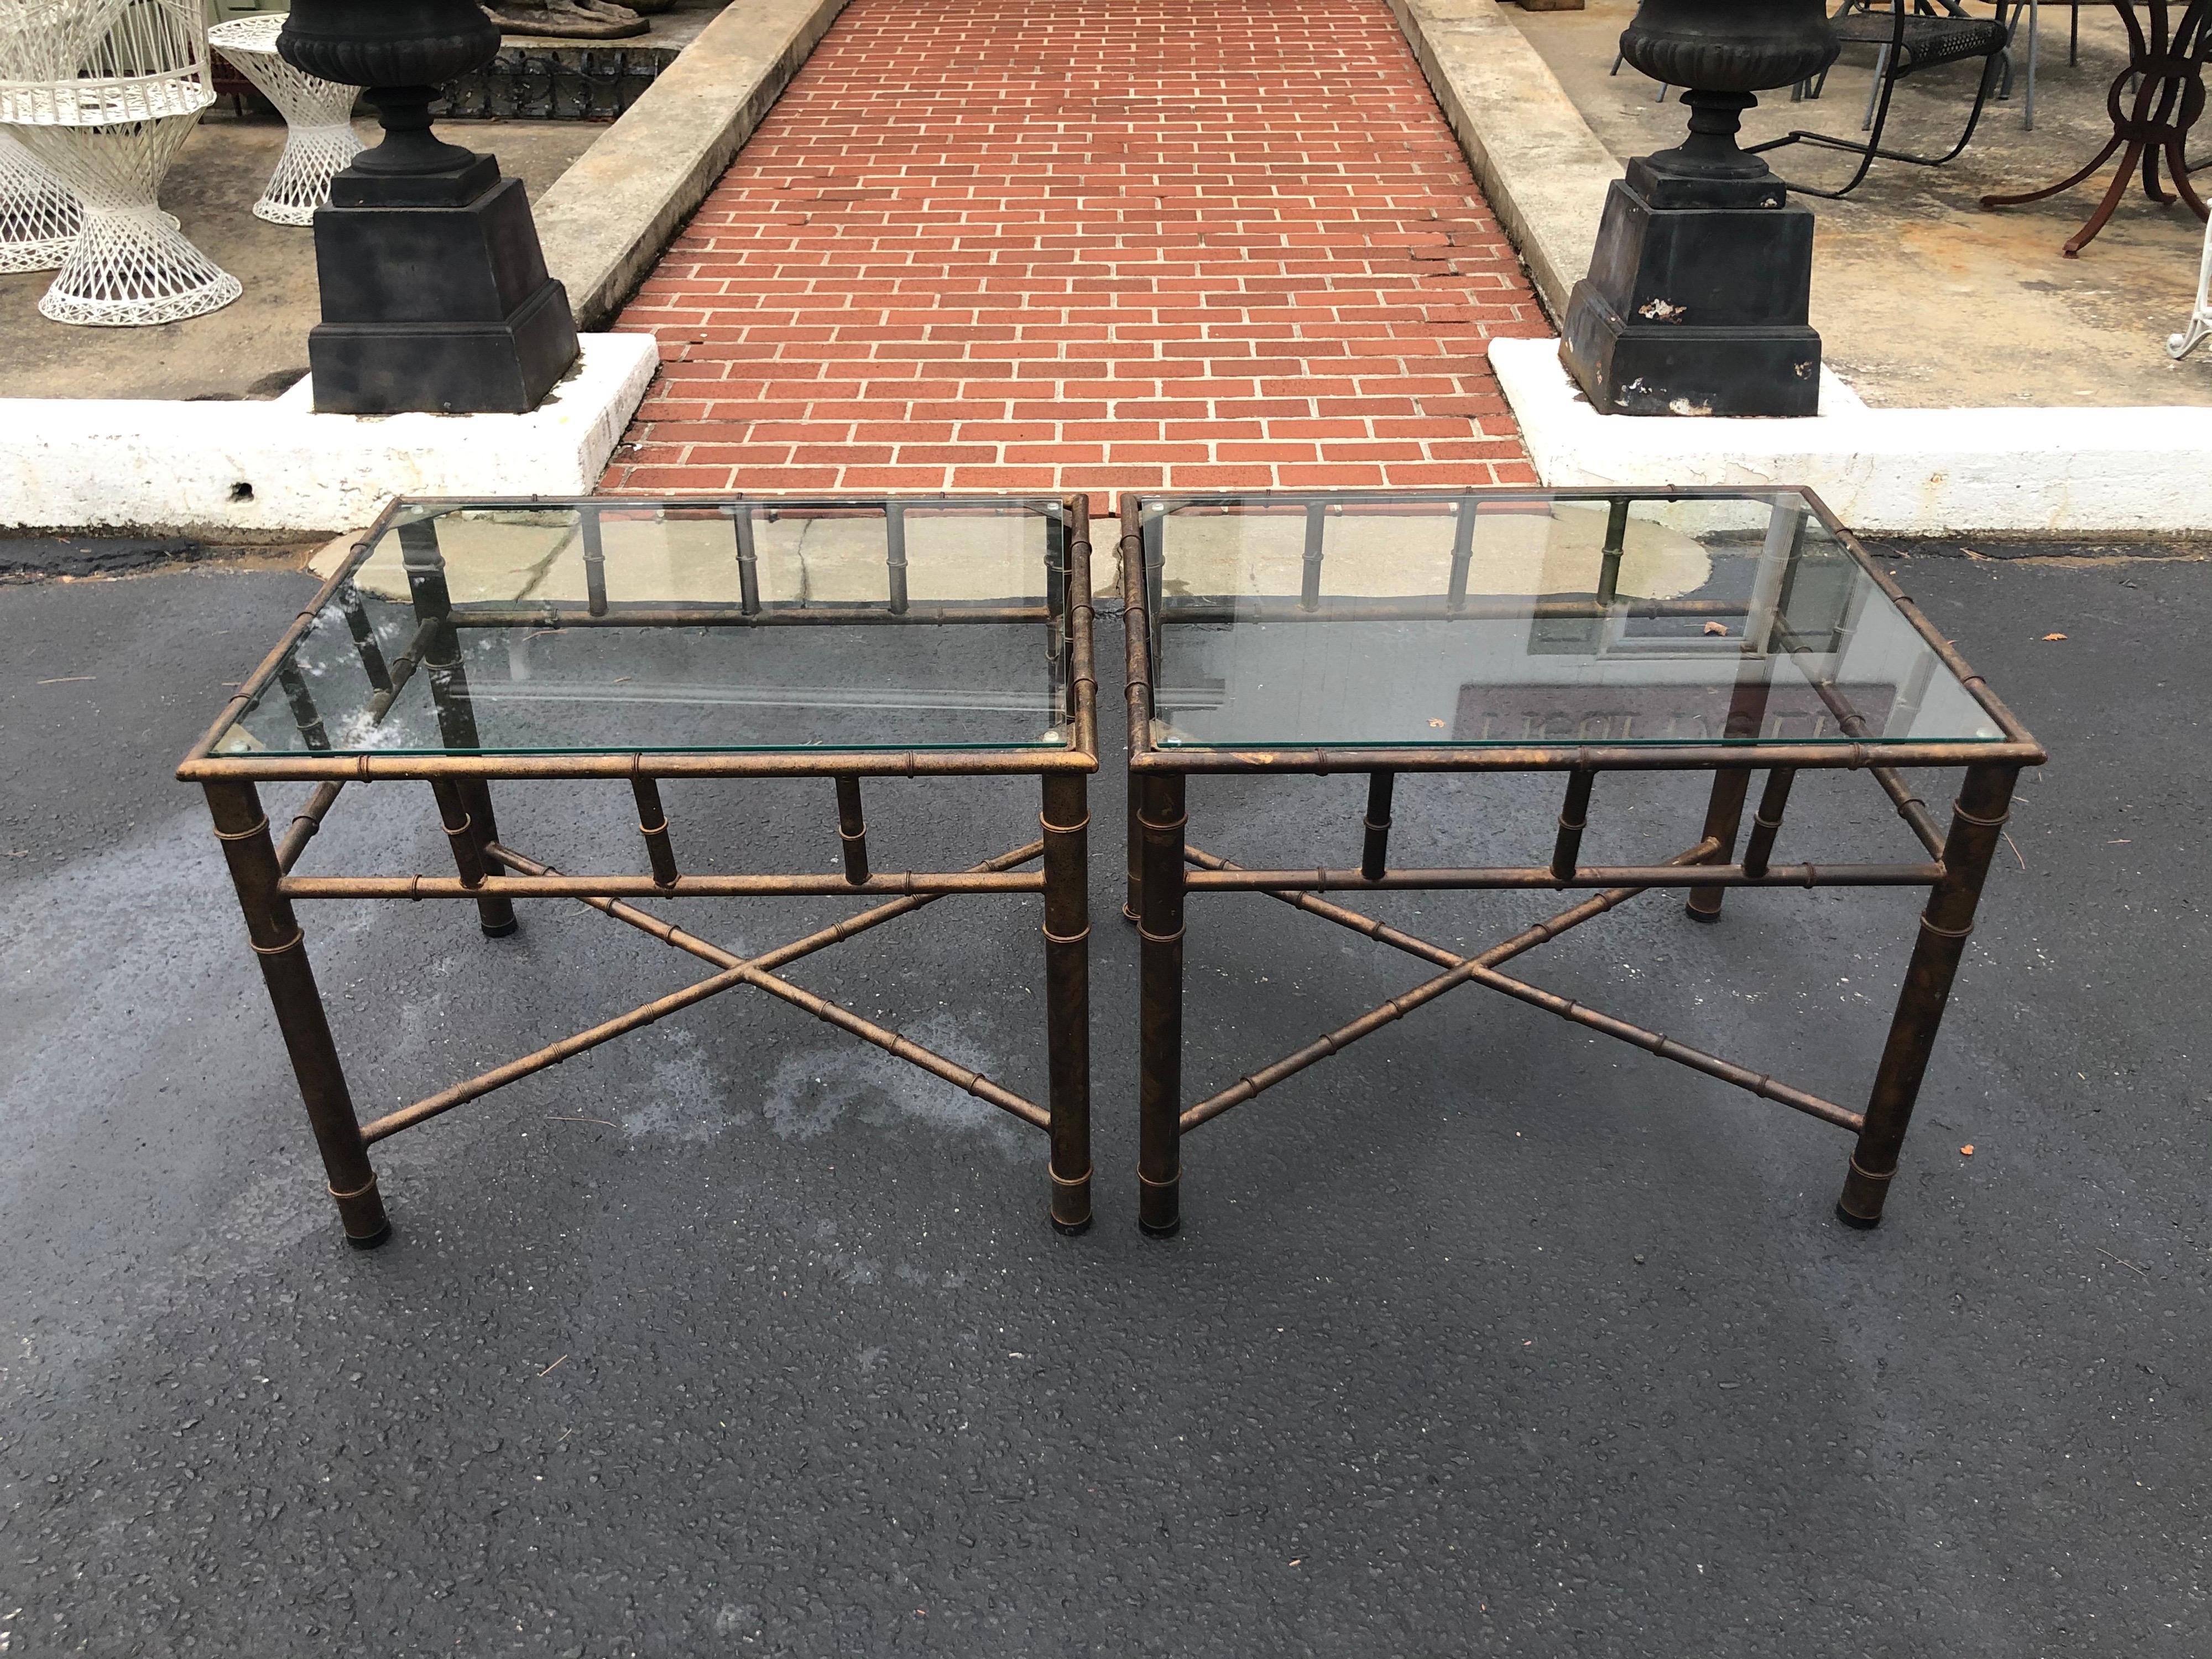 Pair of faux bamboo metal end tables or use as nightstands. Timeless, traditional design in the style of Diego Giacometti. Quantity is 2.  The price is for the pair not per item. 
Elegant and sophisticated for that clean urban apartment or country